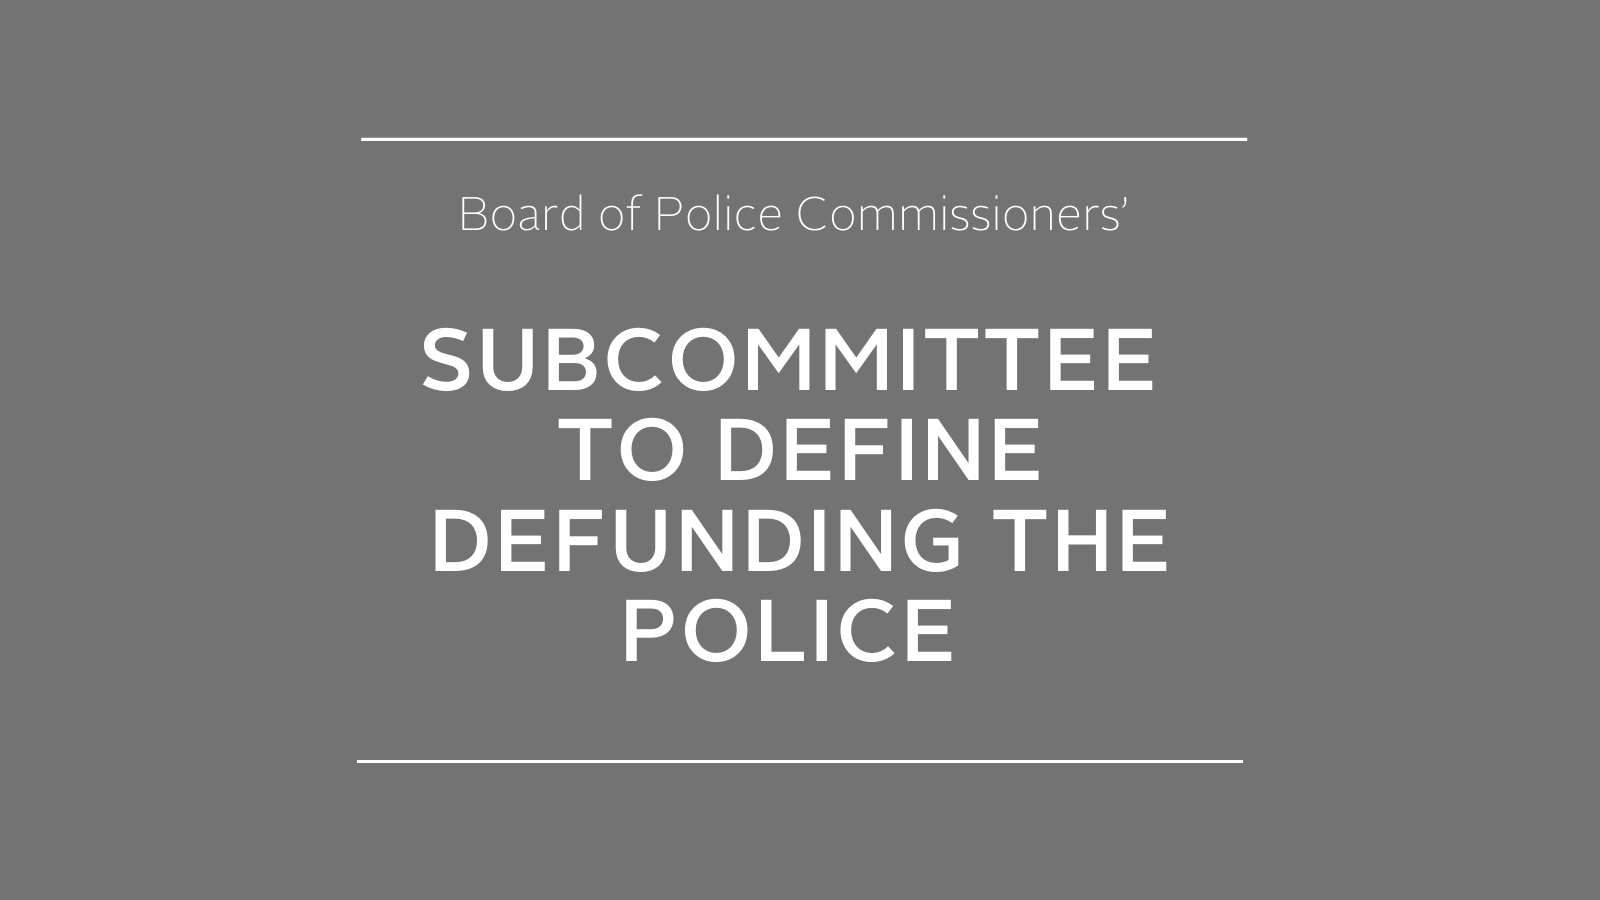 Text reads "Board of Police Commissioners' Subcommittee to define defunding the police"